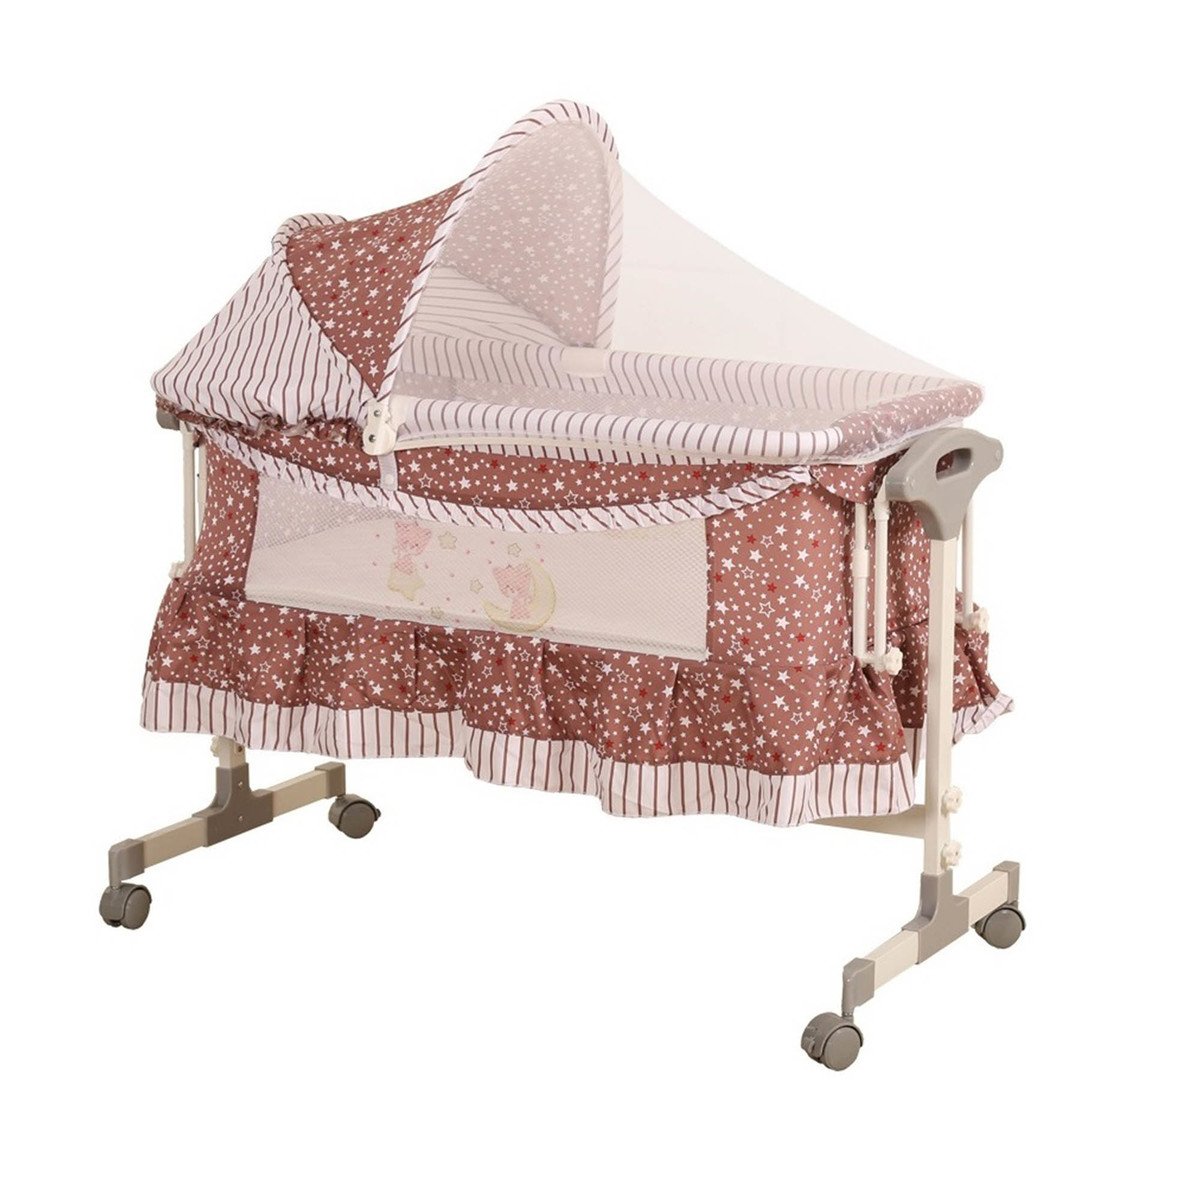 First Step Baby Cradle G70 Brown